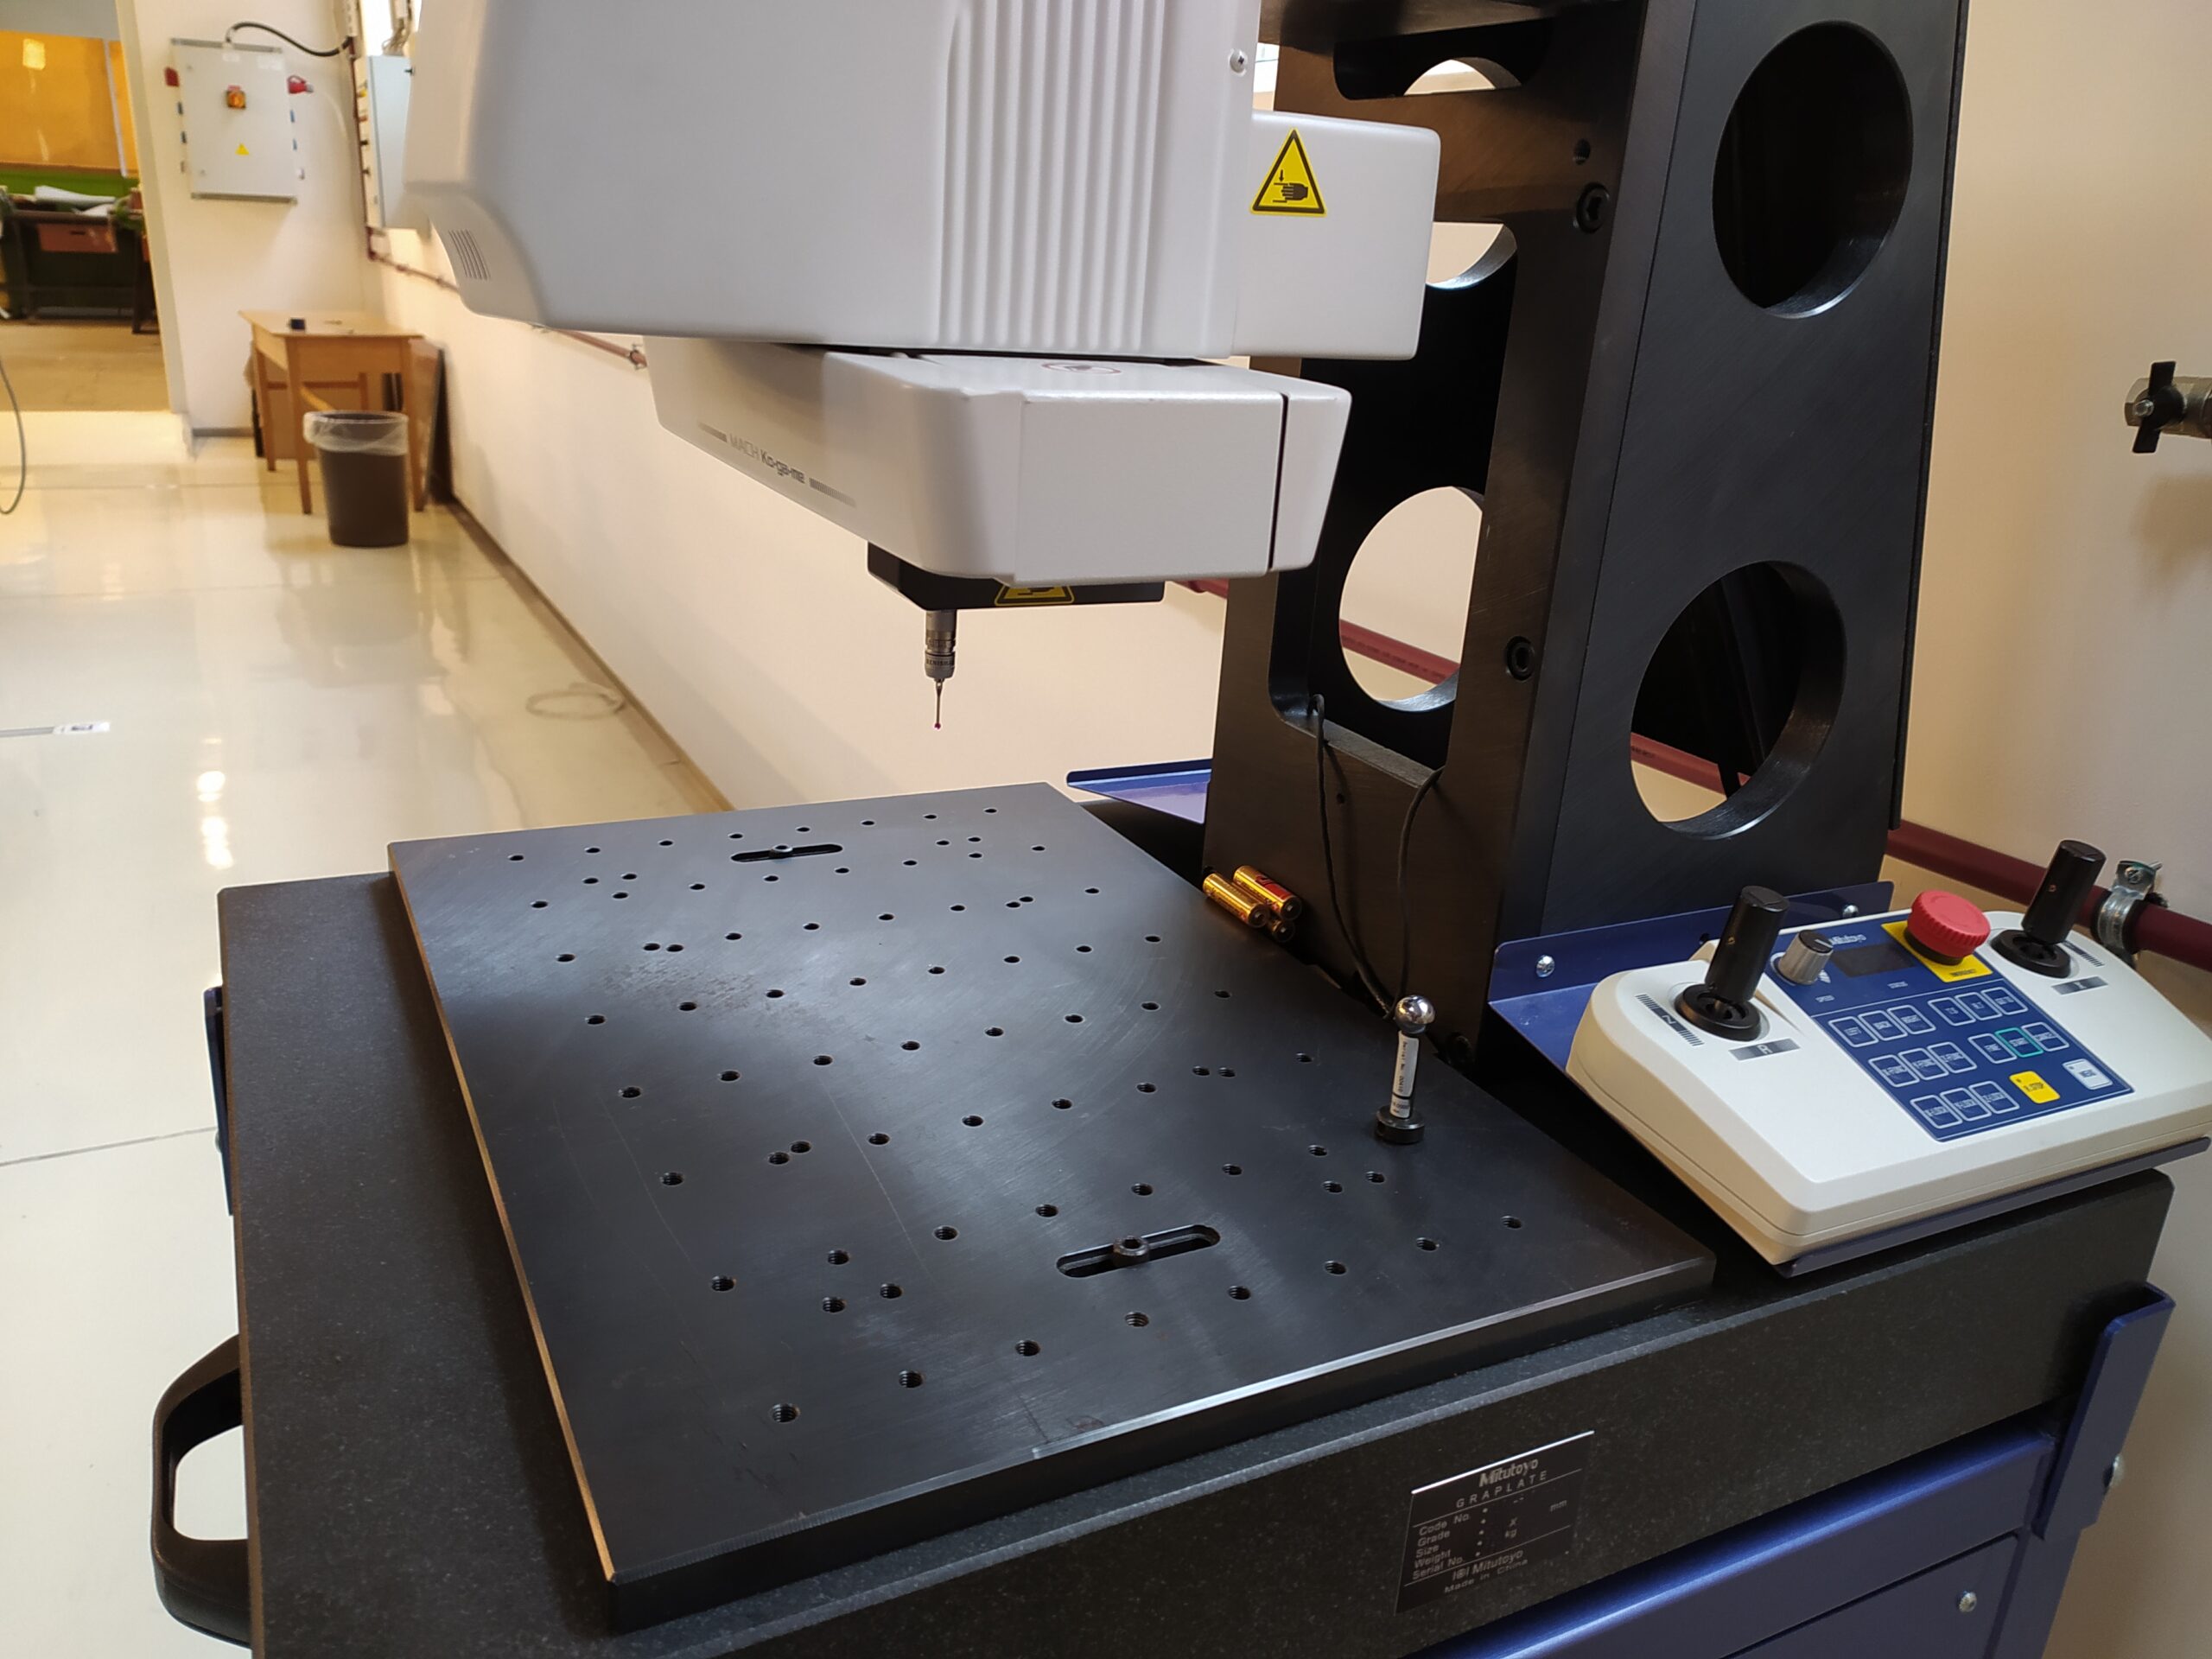 Mitutoyo Hungary Ltd. provided a new CMM for the Department